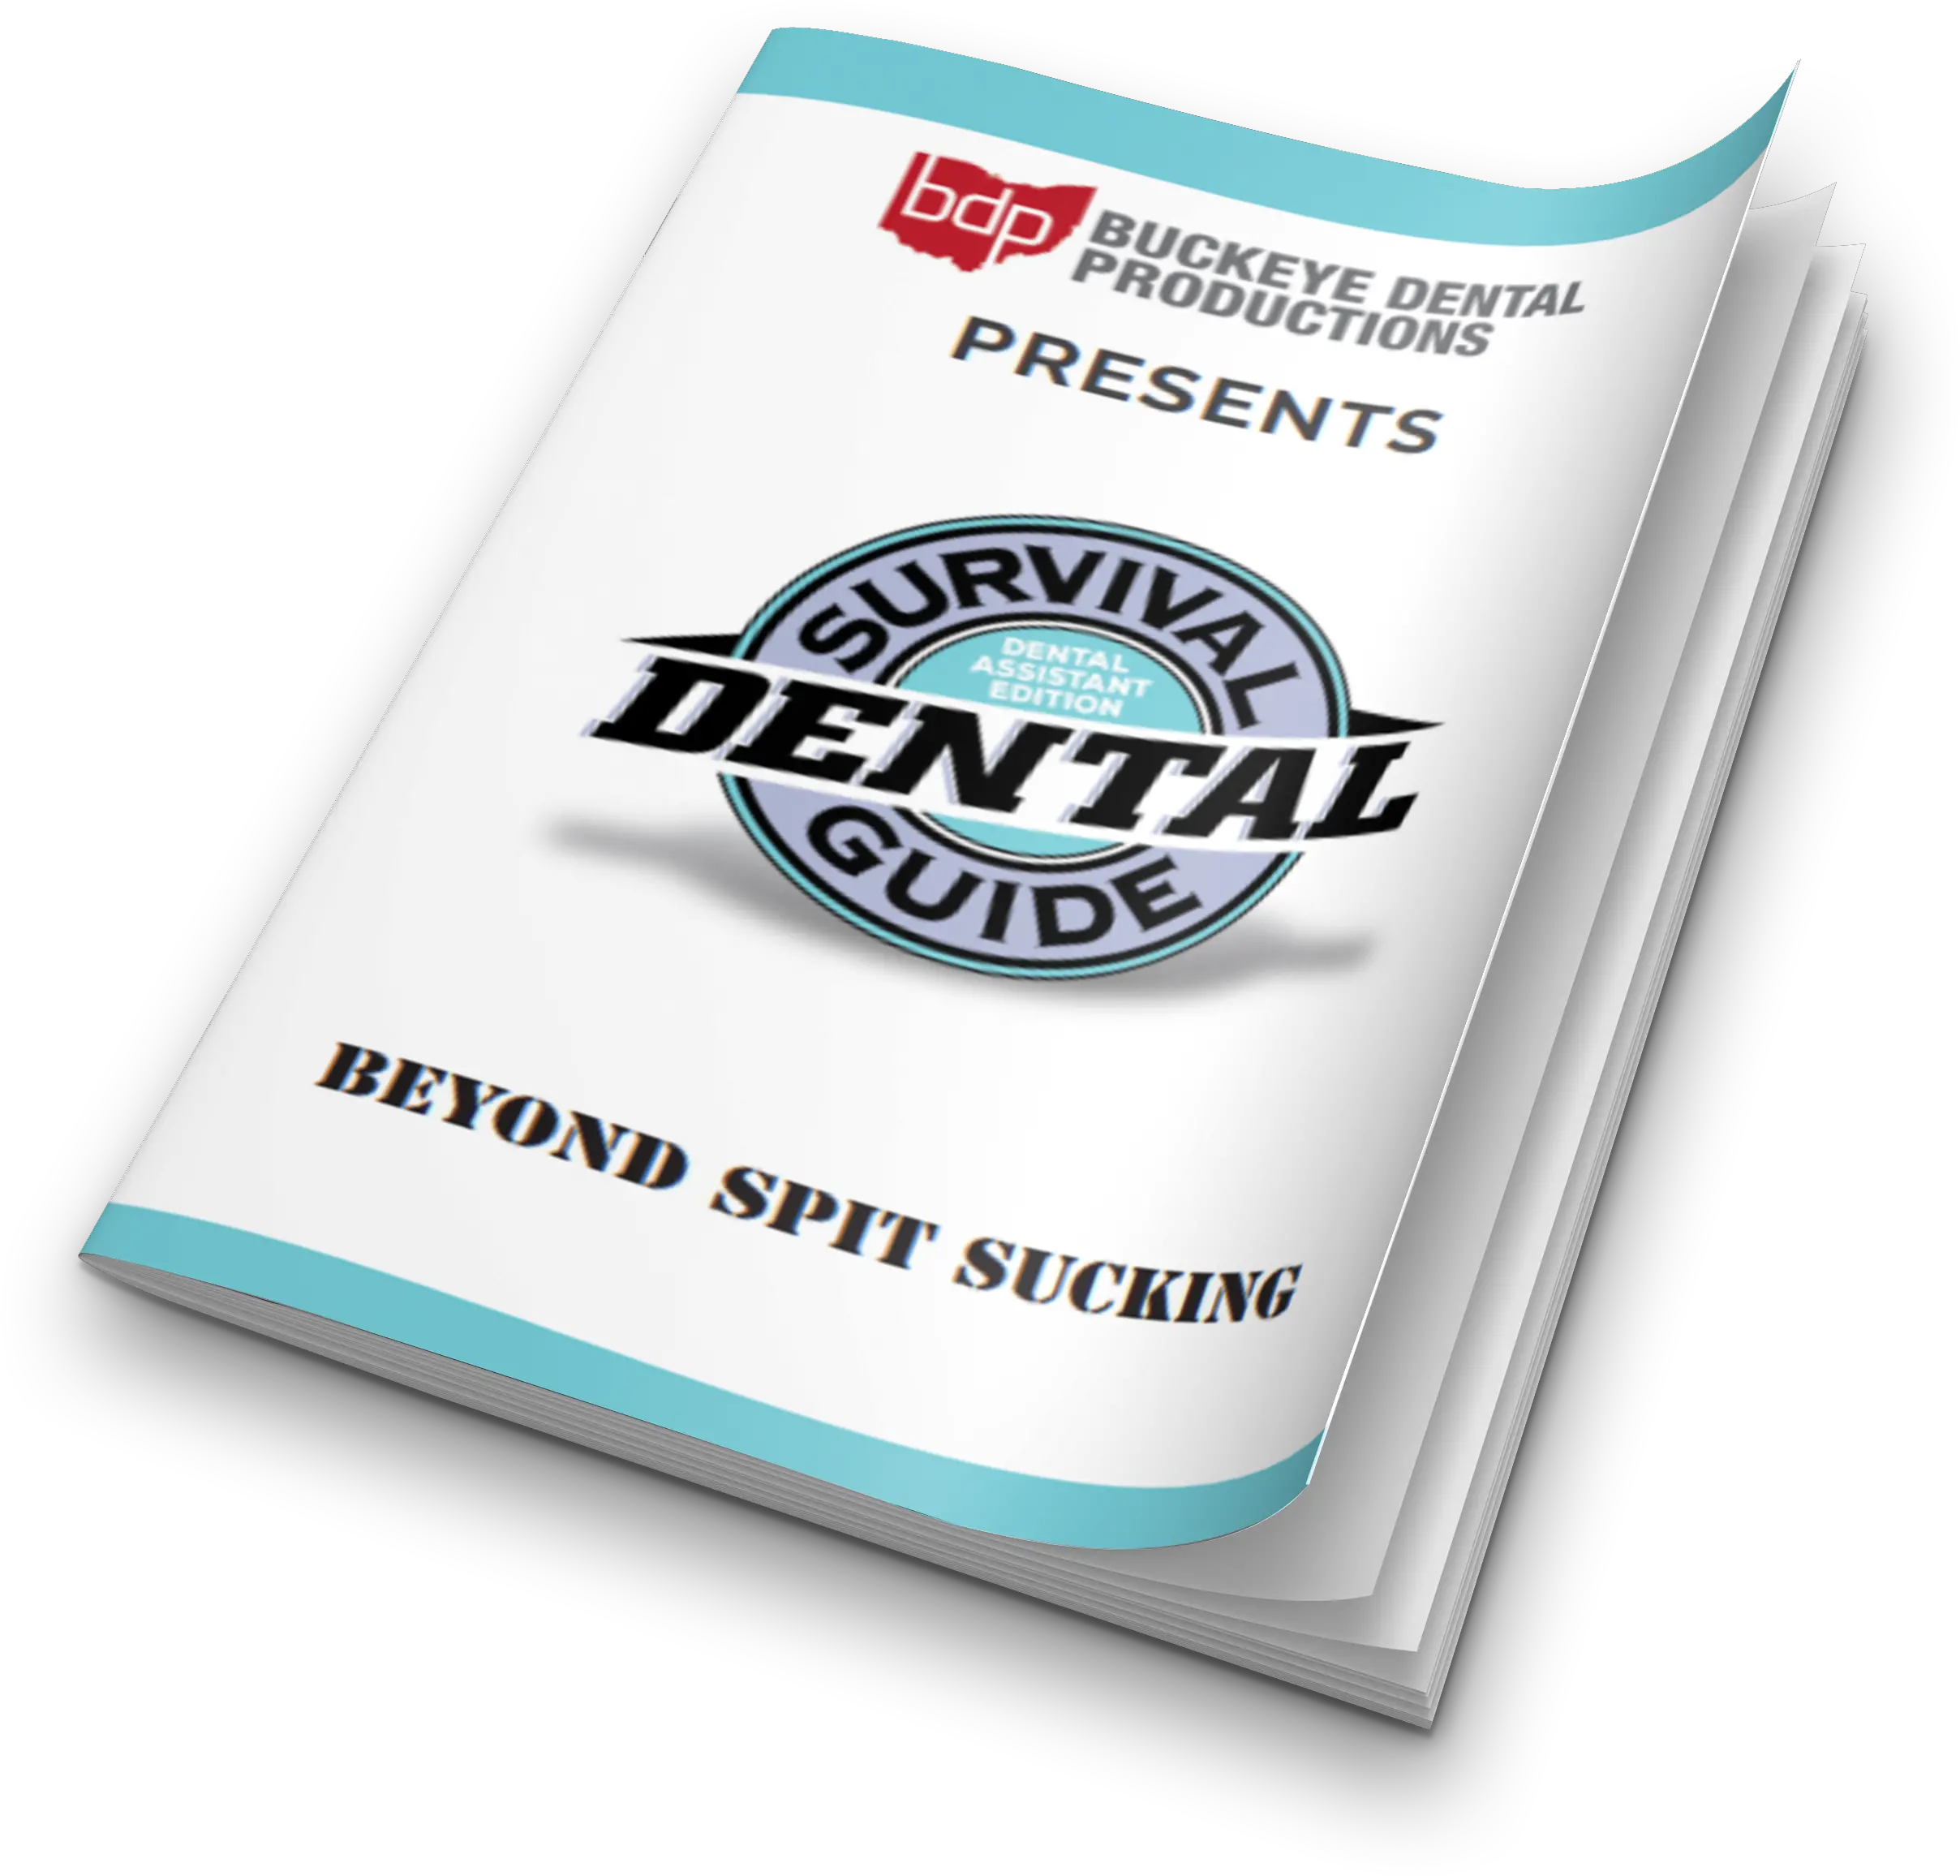 Beyond Spit Sucking Preview U2013 Buckeye Dental Productions Viking Png Spit Png